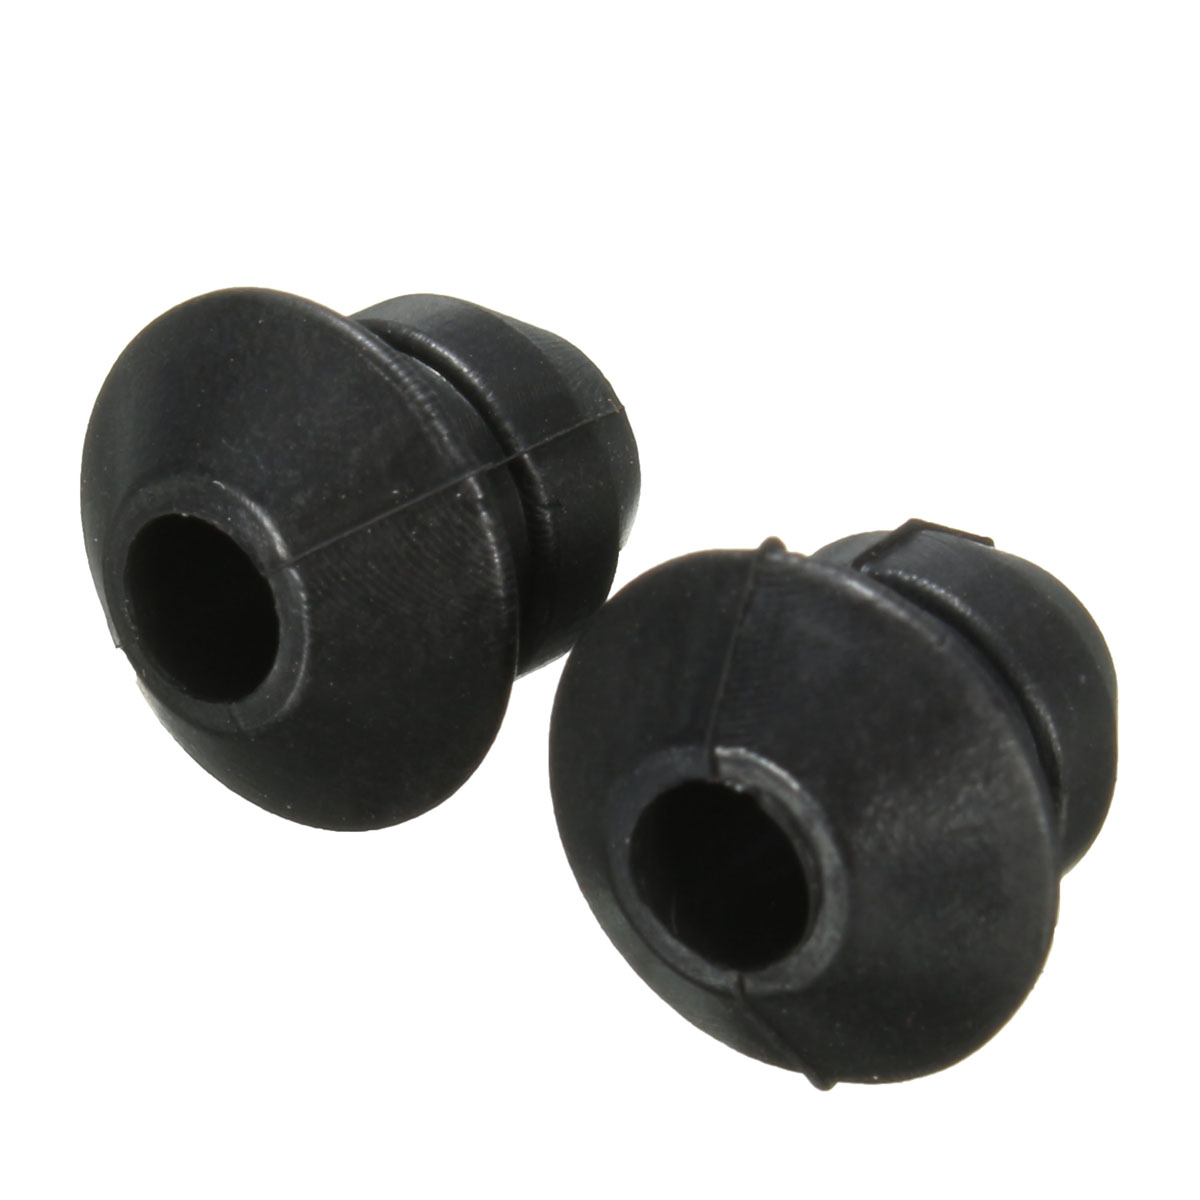 2pcs Gardening Chainsaw Trimmer Fuel Tank Hose Grommets for Stihl FS80 ...